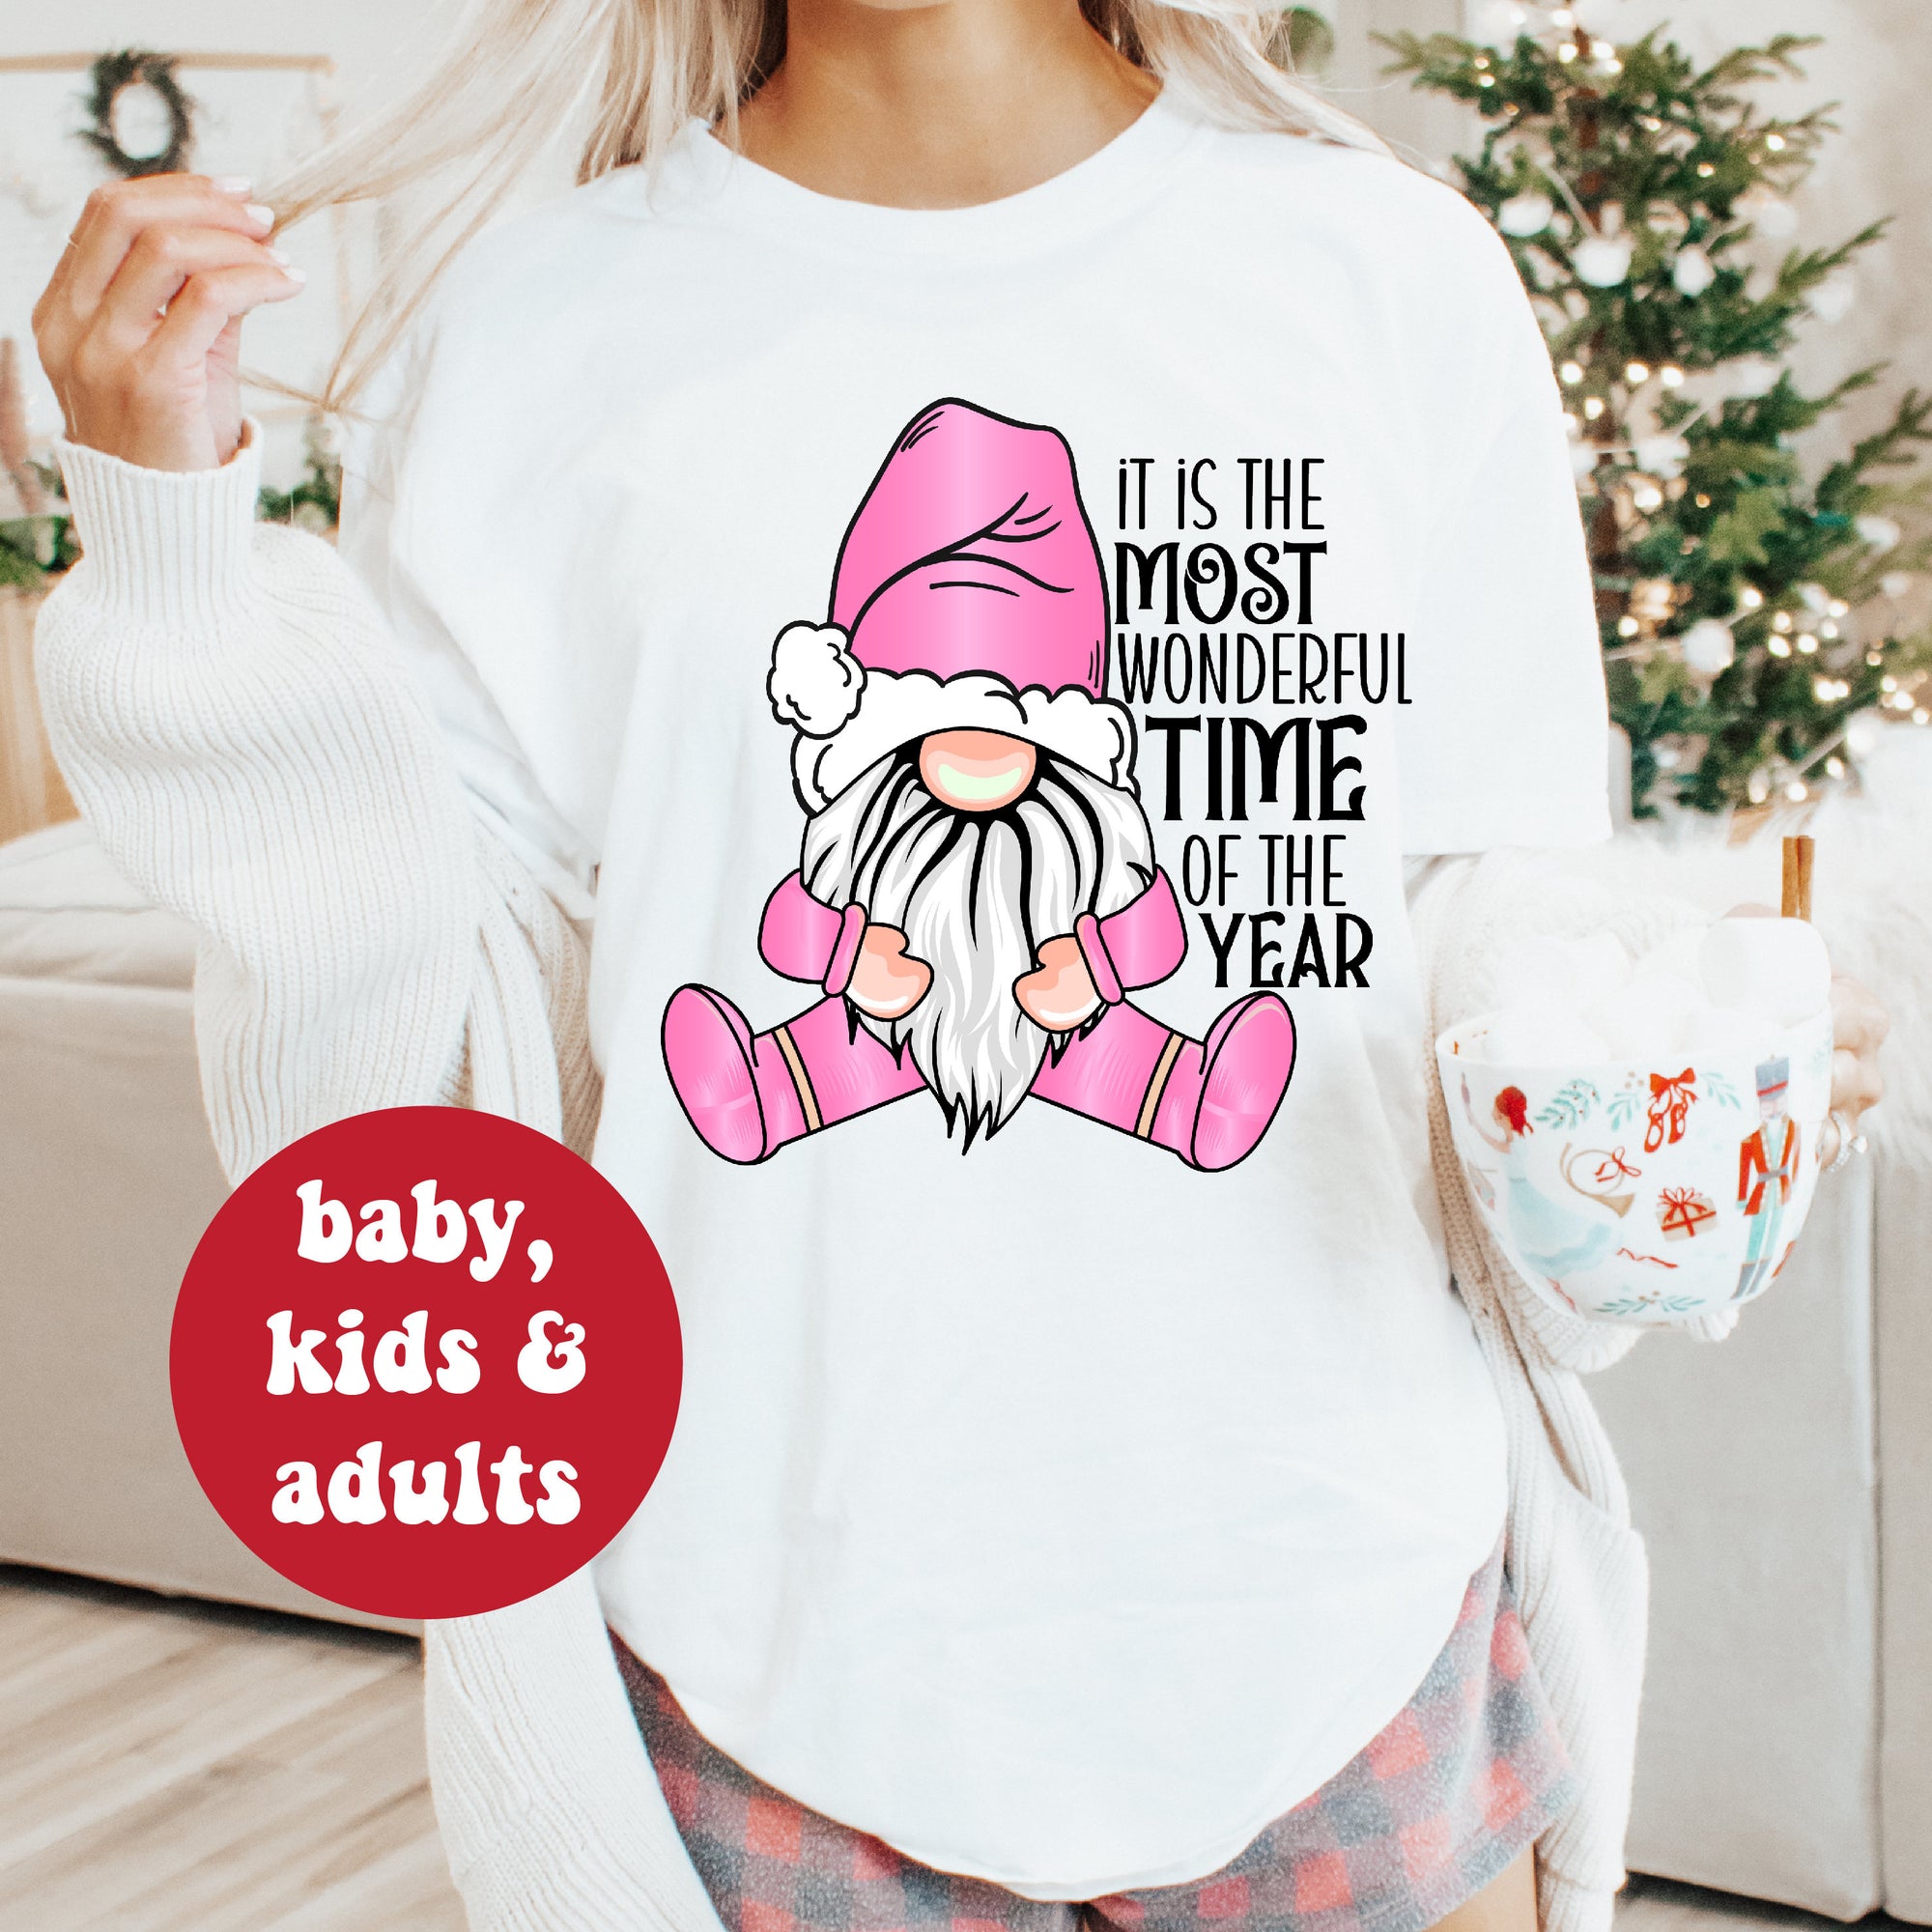 It Is The Most Wonderful Time Of The Year T-Shirt, Pink Christmas Gnome, Christmas T-Shirts, Matching Gnome T-Shirts, Matching Family Tees